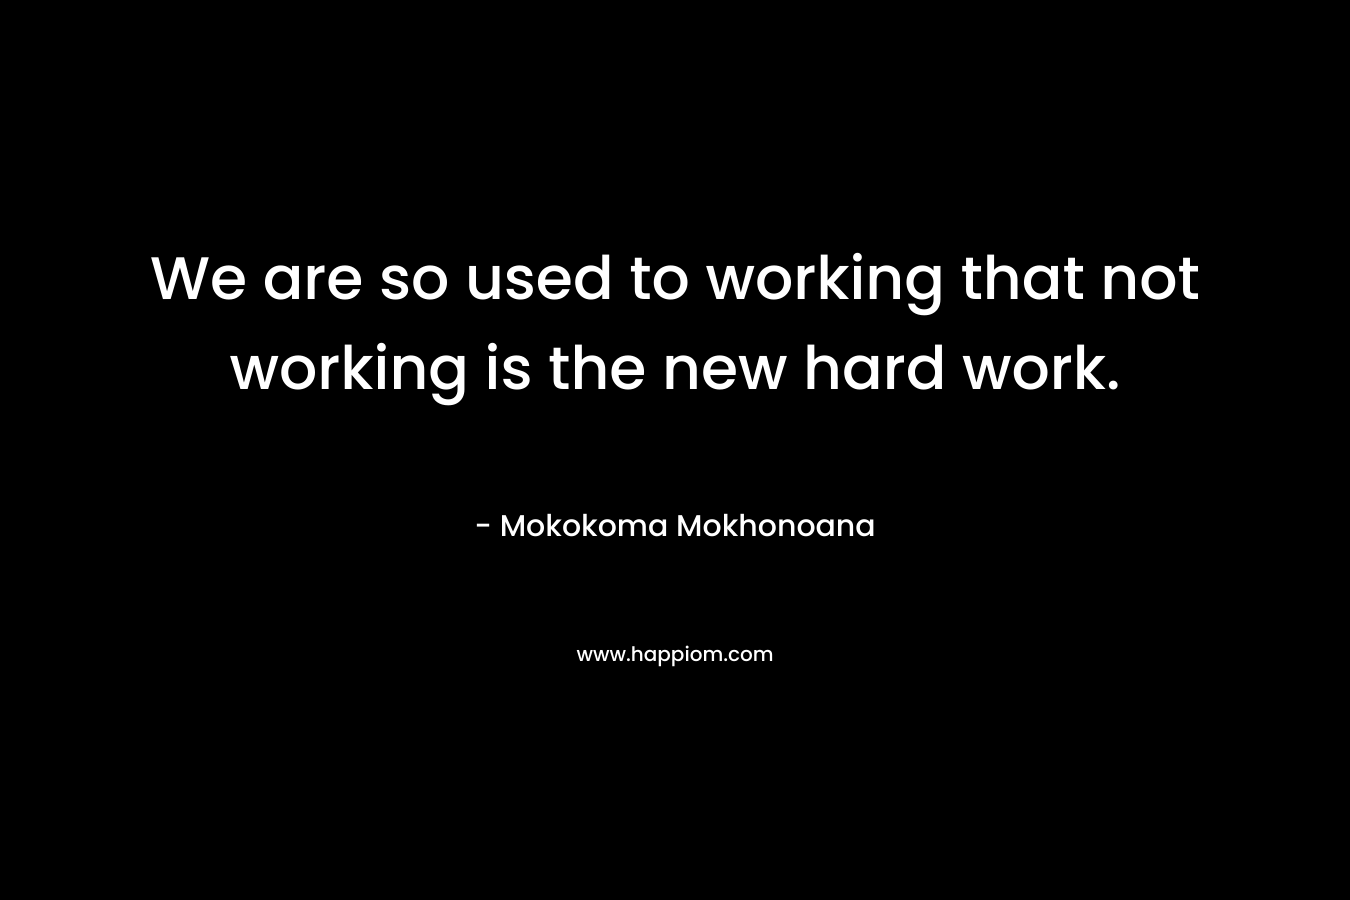 We are so used to working that not working is the new hard work.